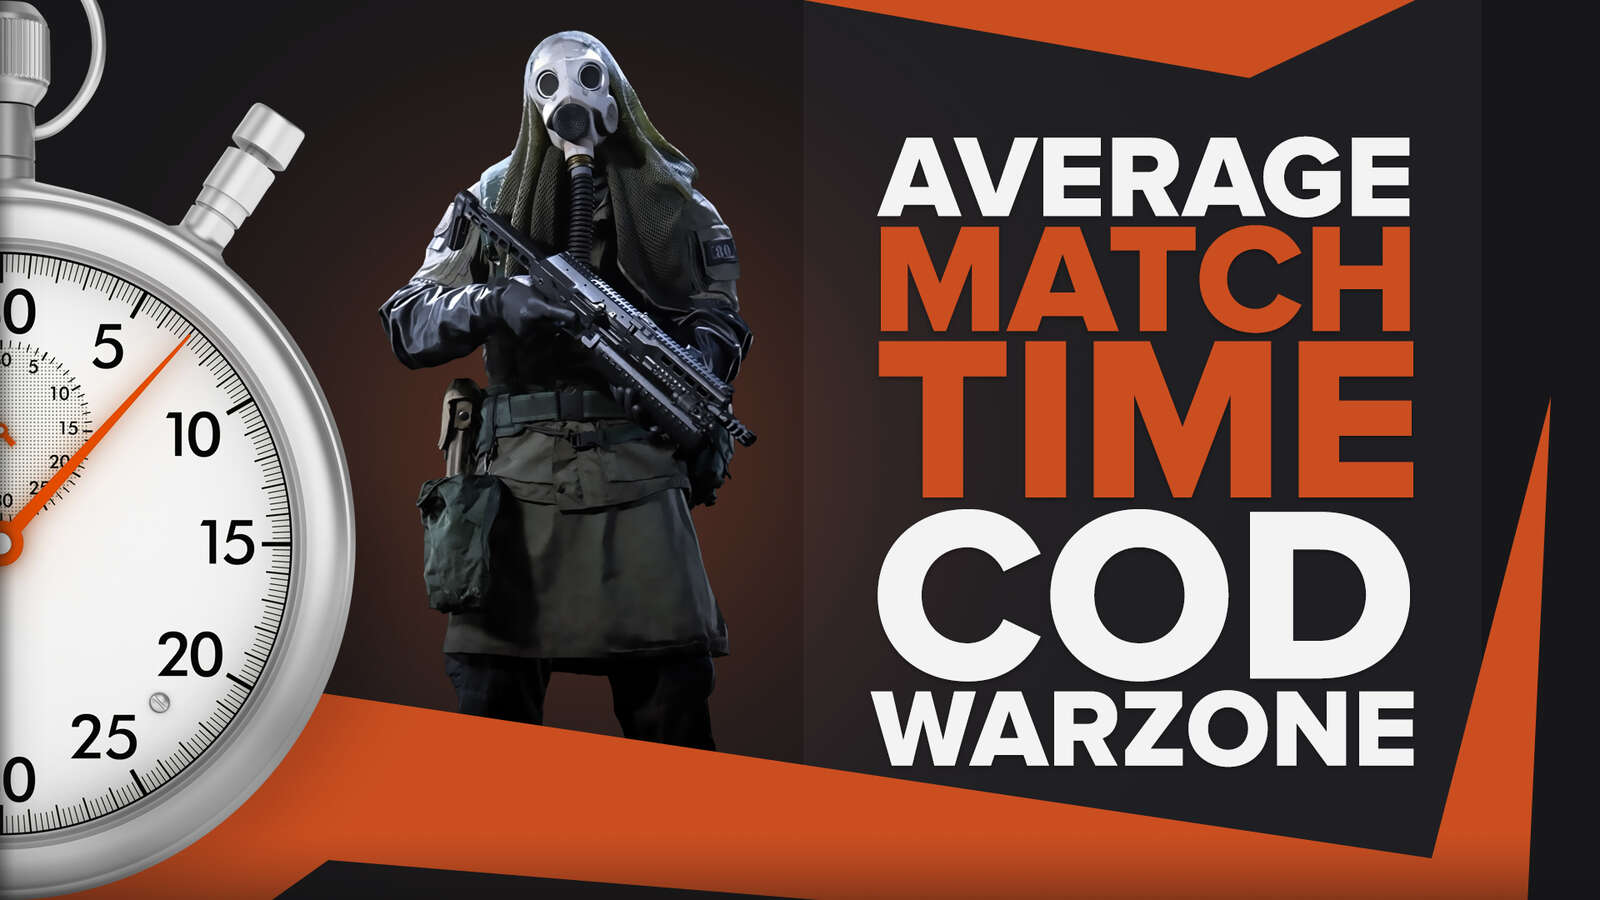 What's The Average Match Length Of Call of Duty: Warzone?